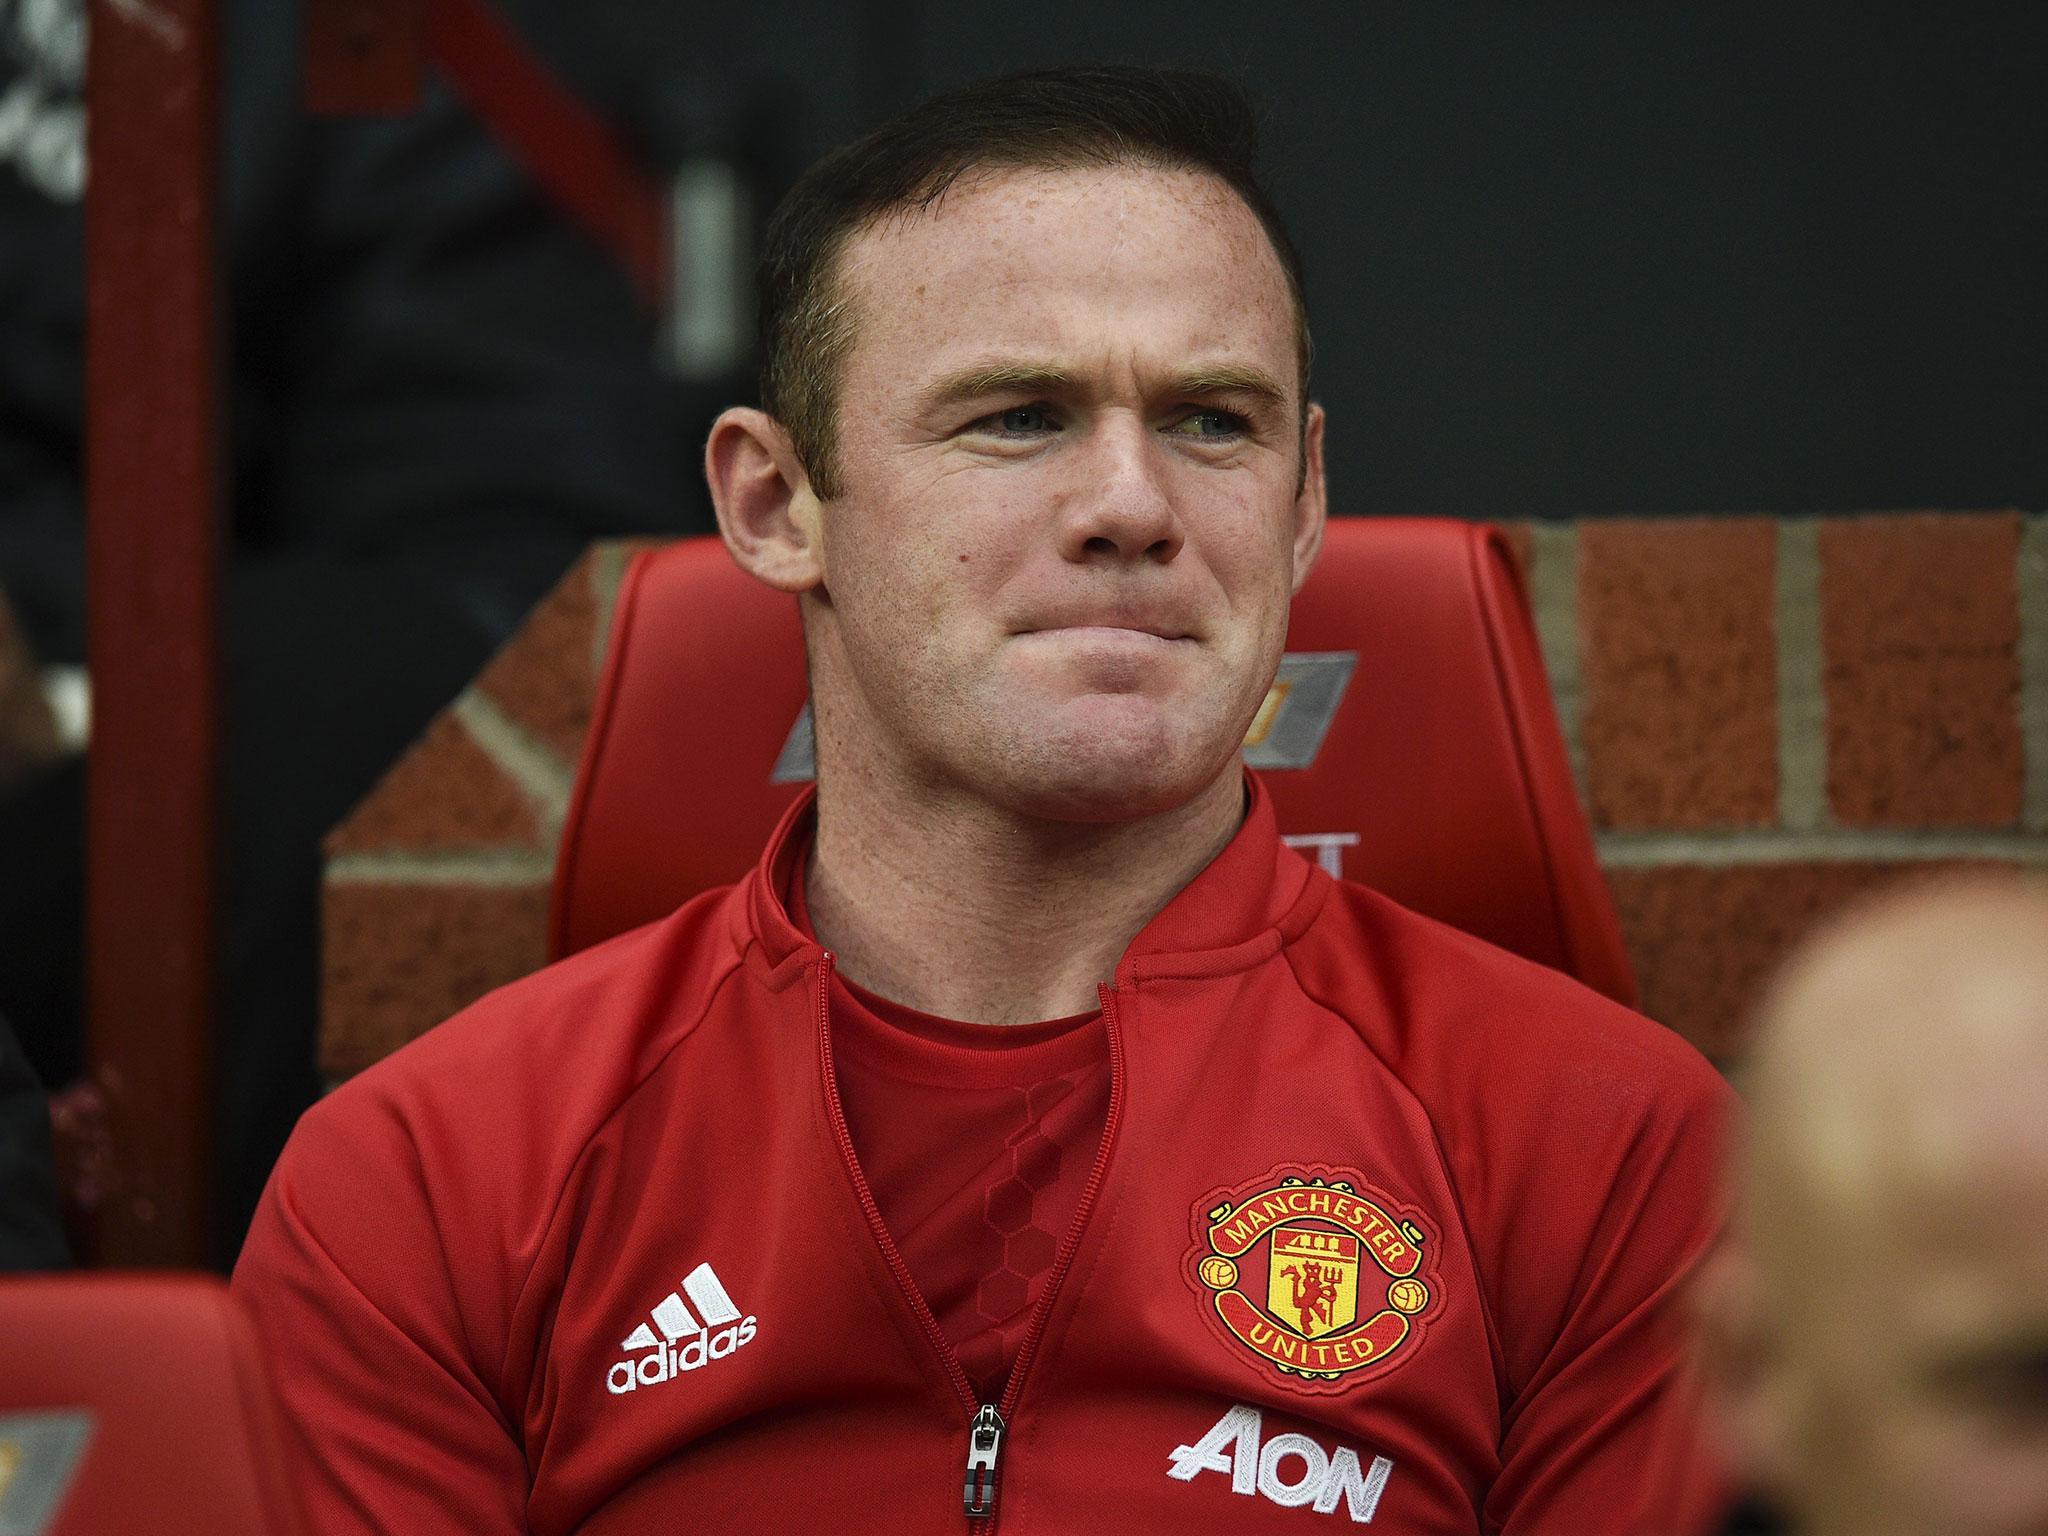 Wayne Rooney has spent much of his recent career on the outside looking in